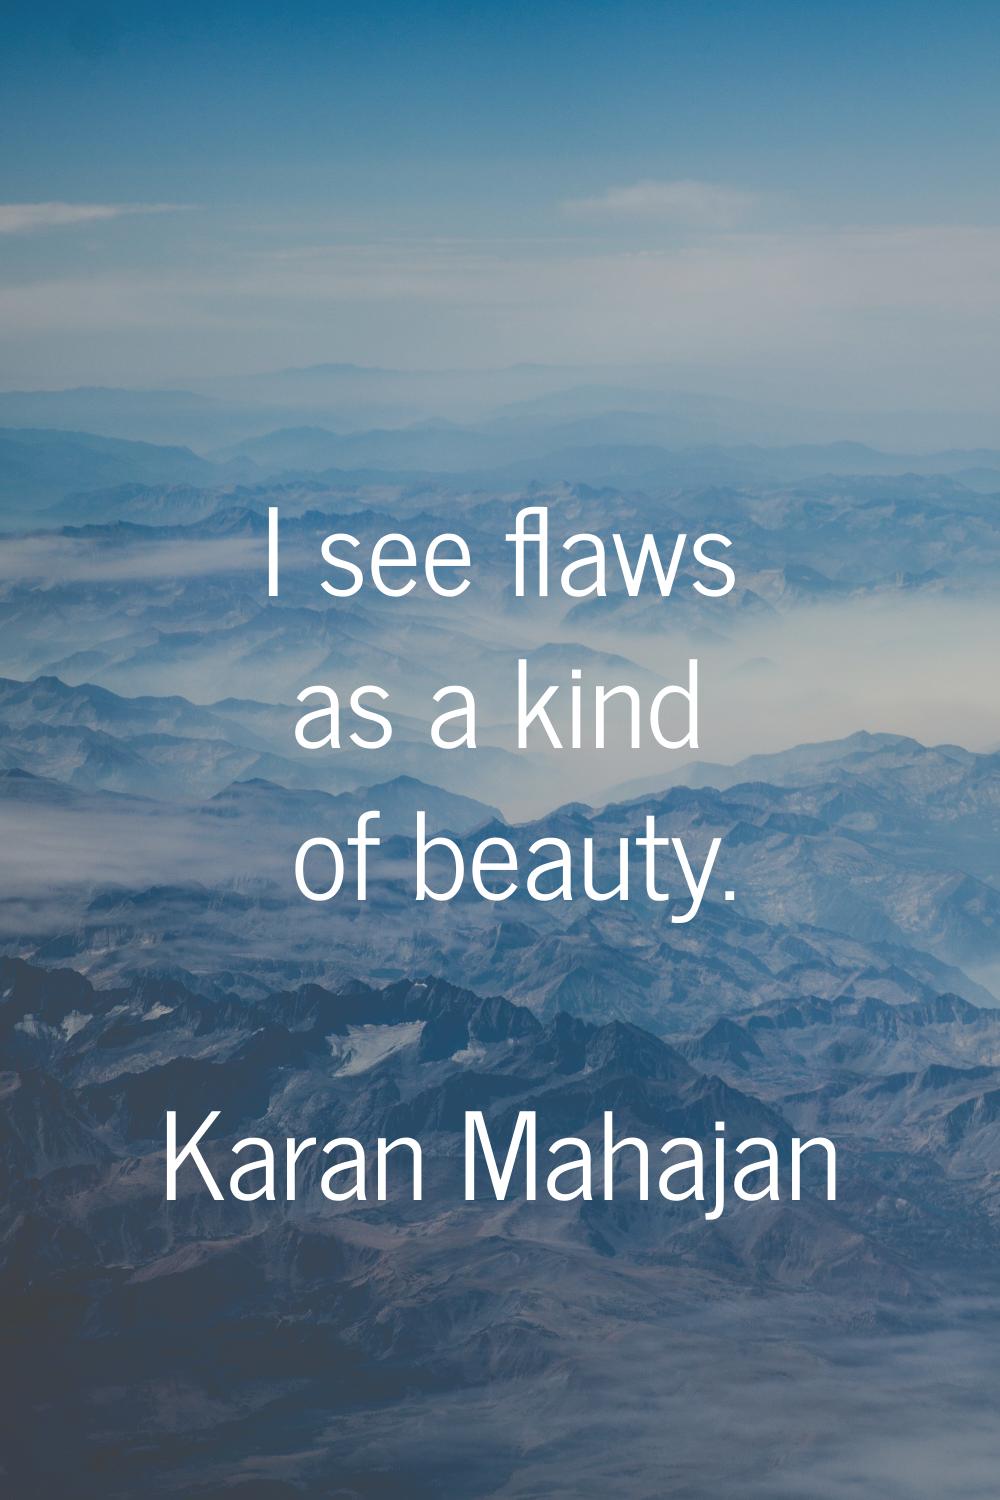 I see flaws as a kind of beauty.